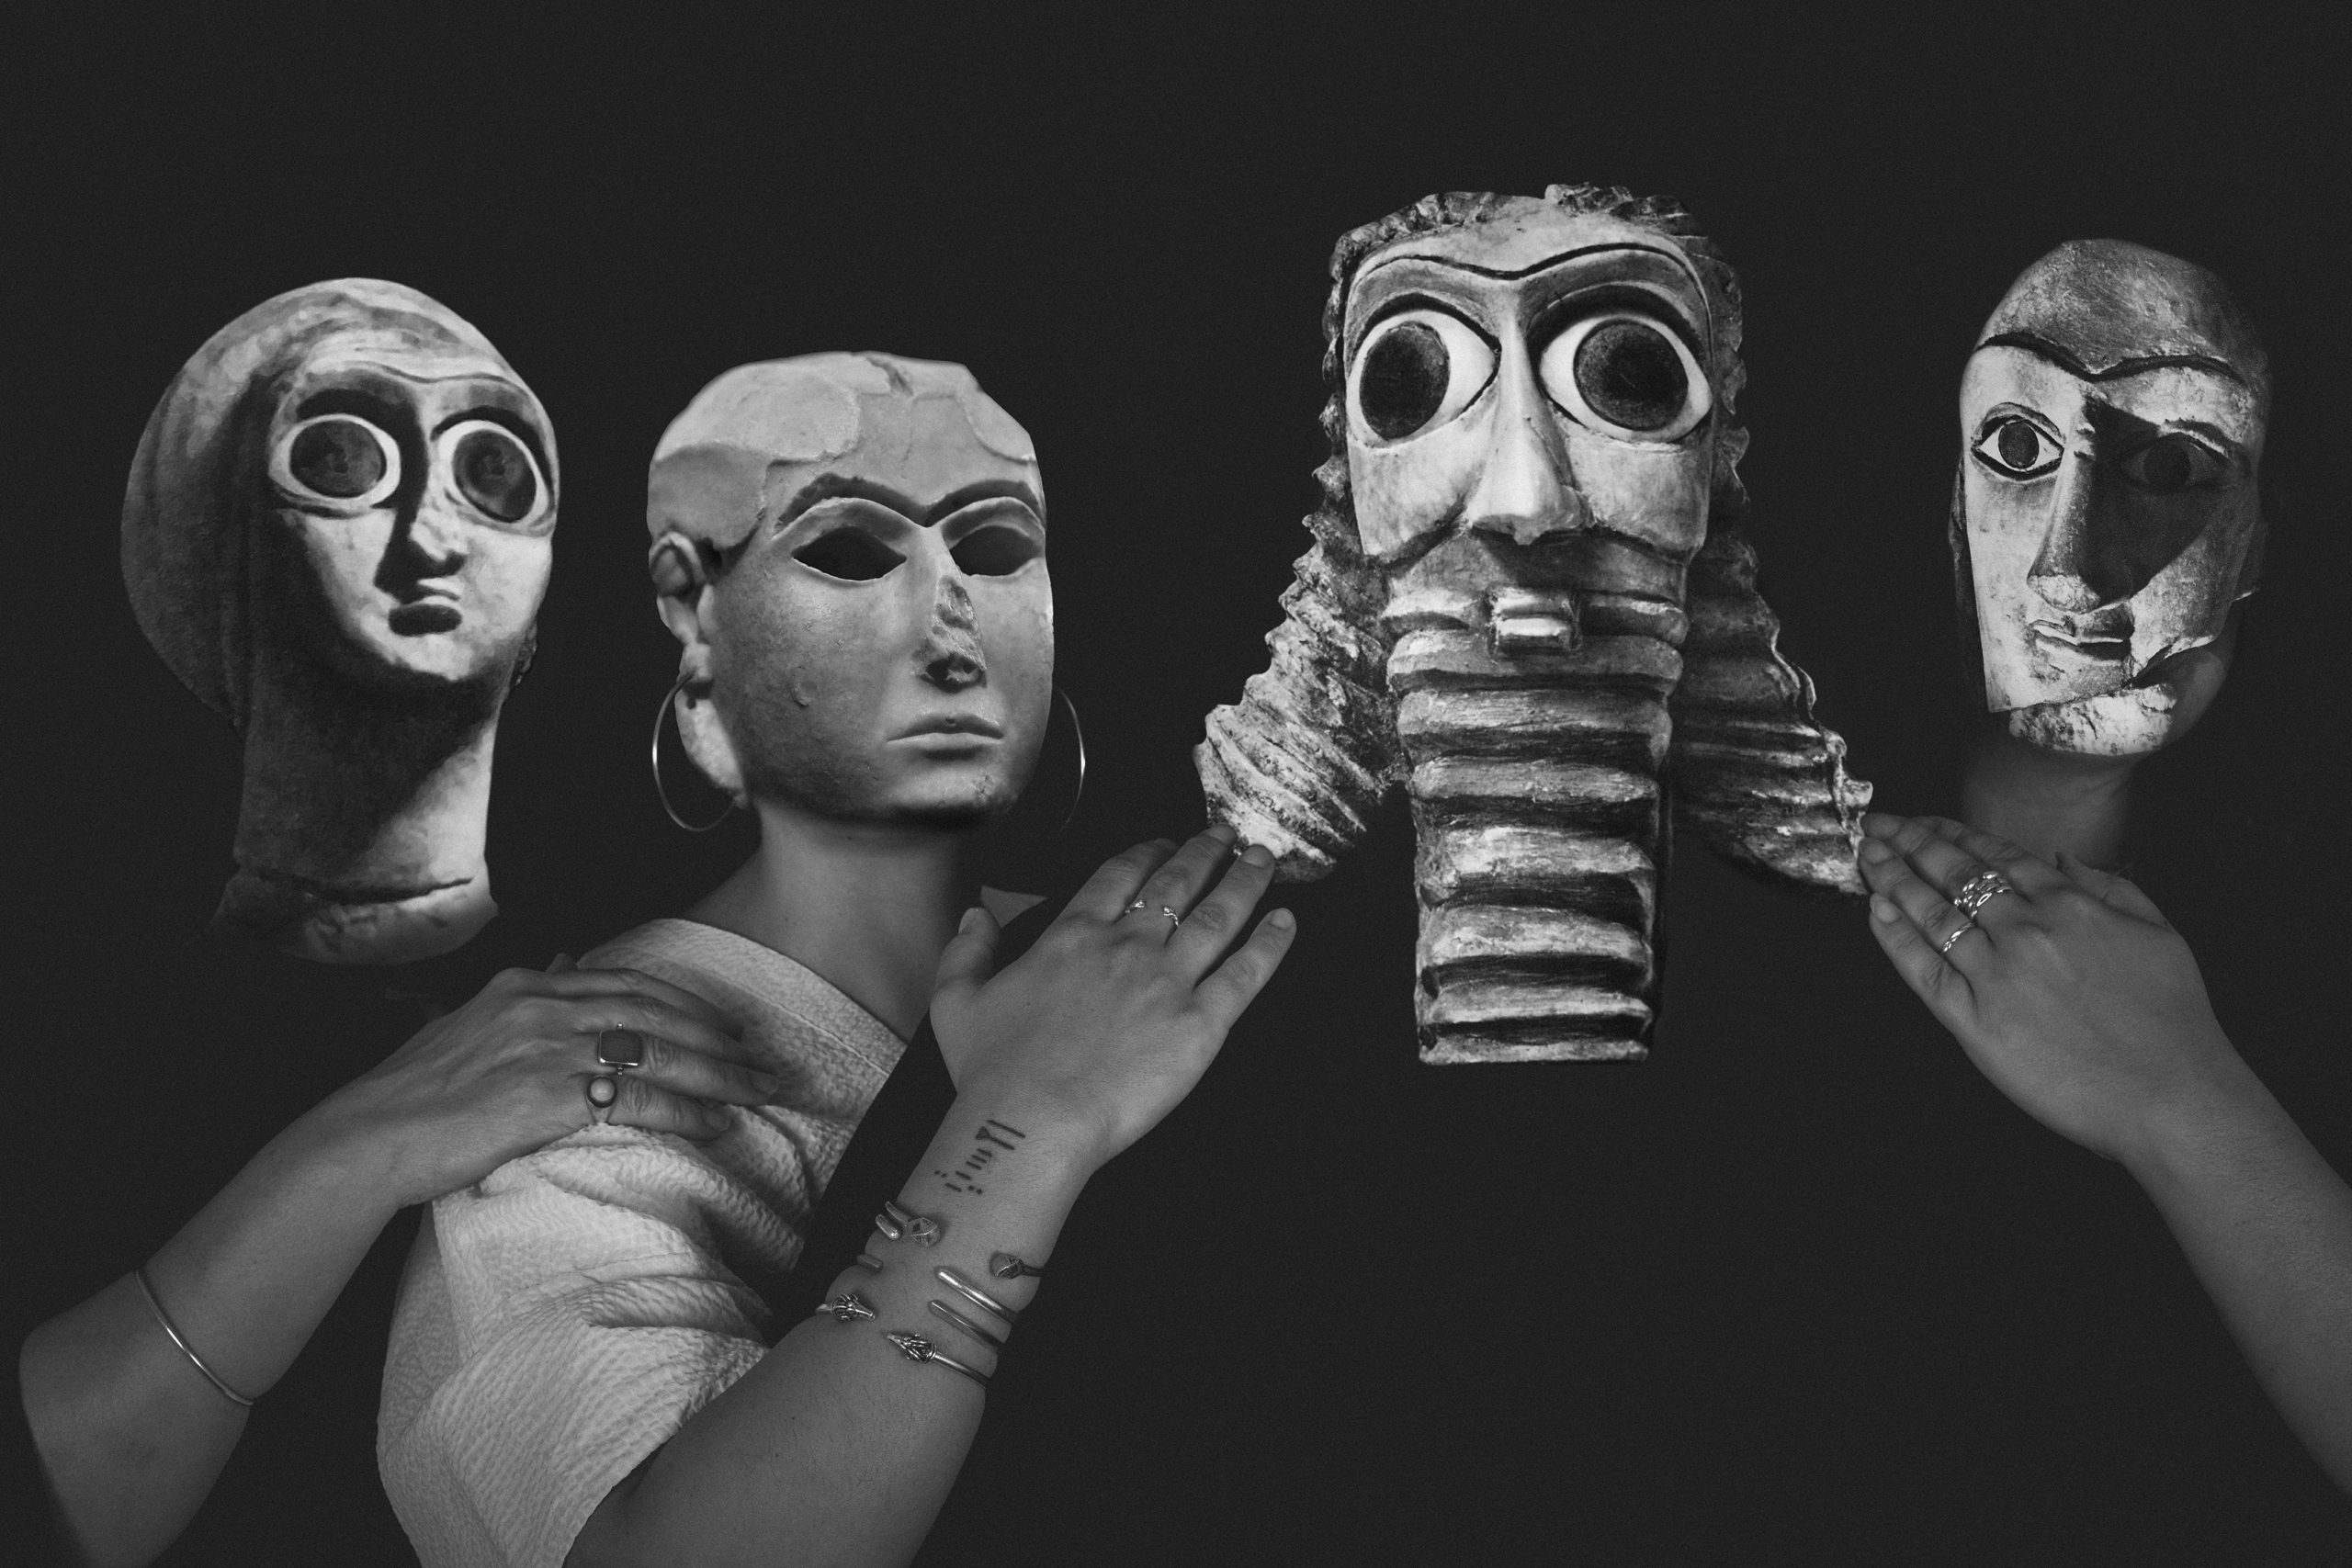 A black-and-white photograph shows four figures from the bust up. They are wearing masks that reference ancient Sumerian artworks and have their hands on each others shoulders.